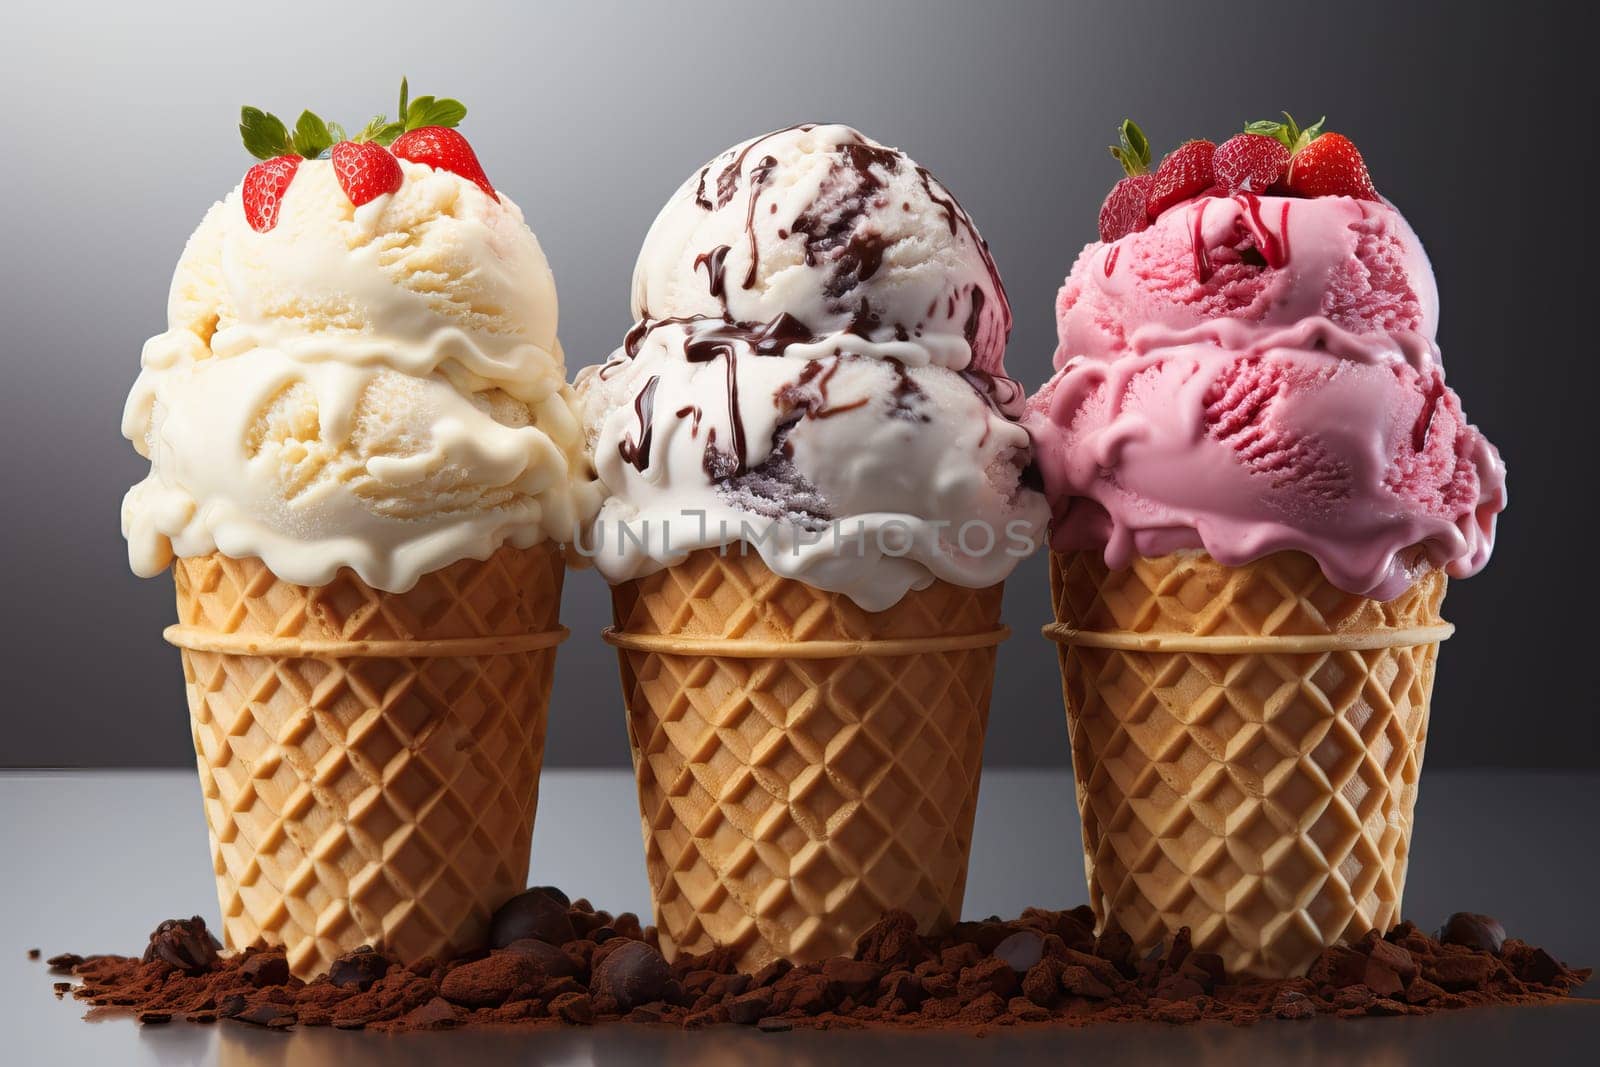 Three ice creams with three different flavors of strawberry, vanilla and banana on a bright background, ice cream in a waffle cup.